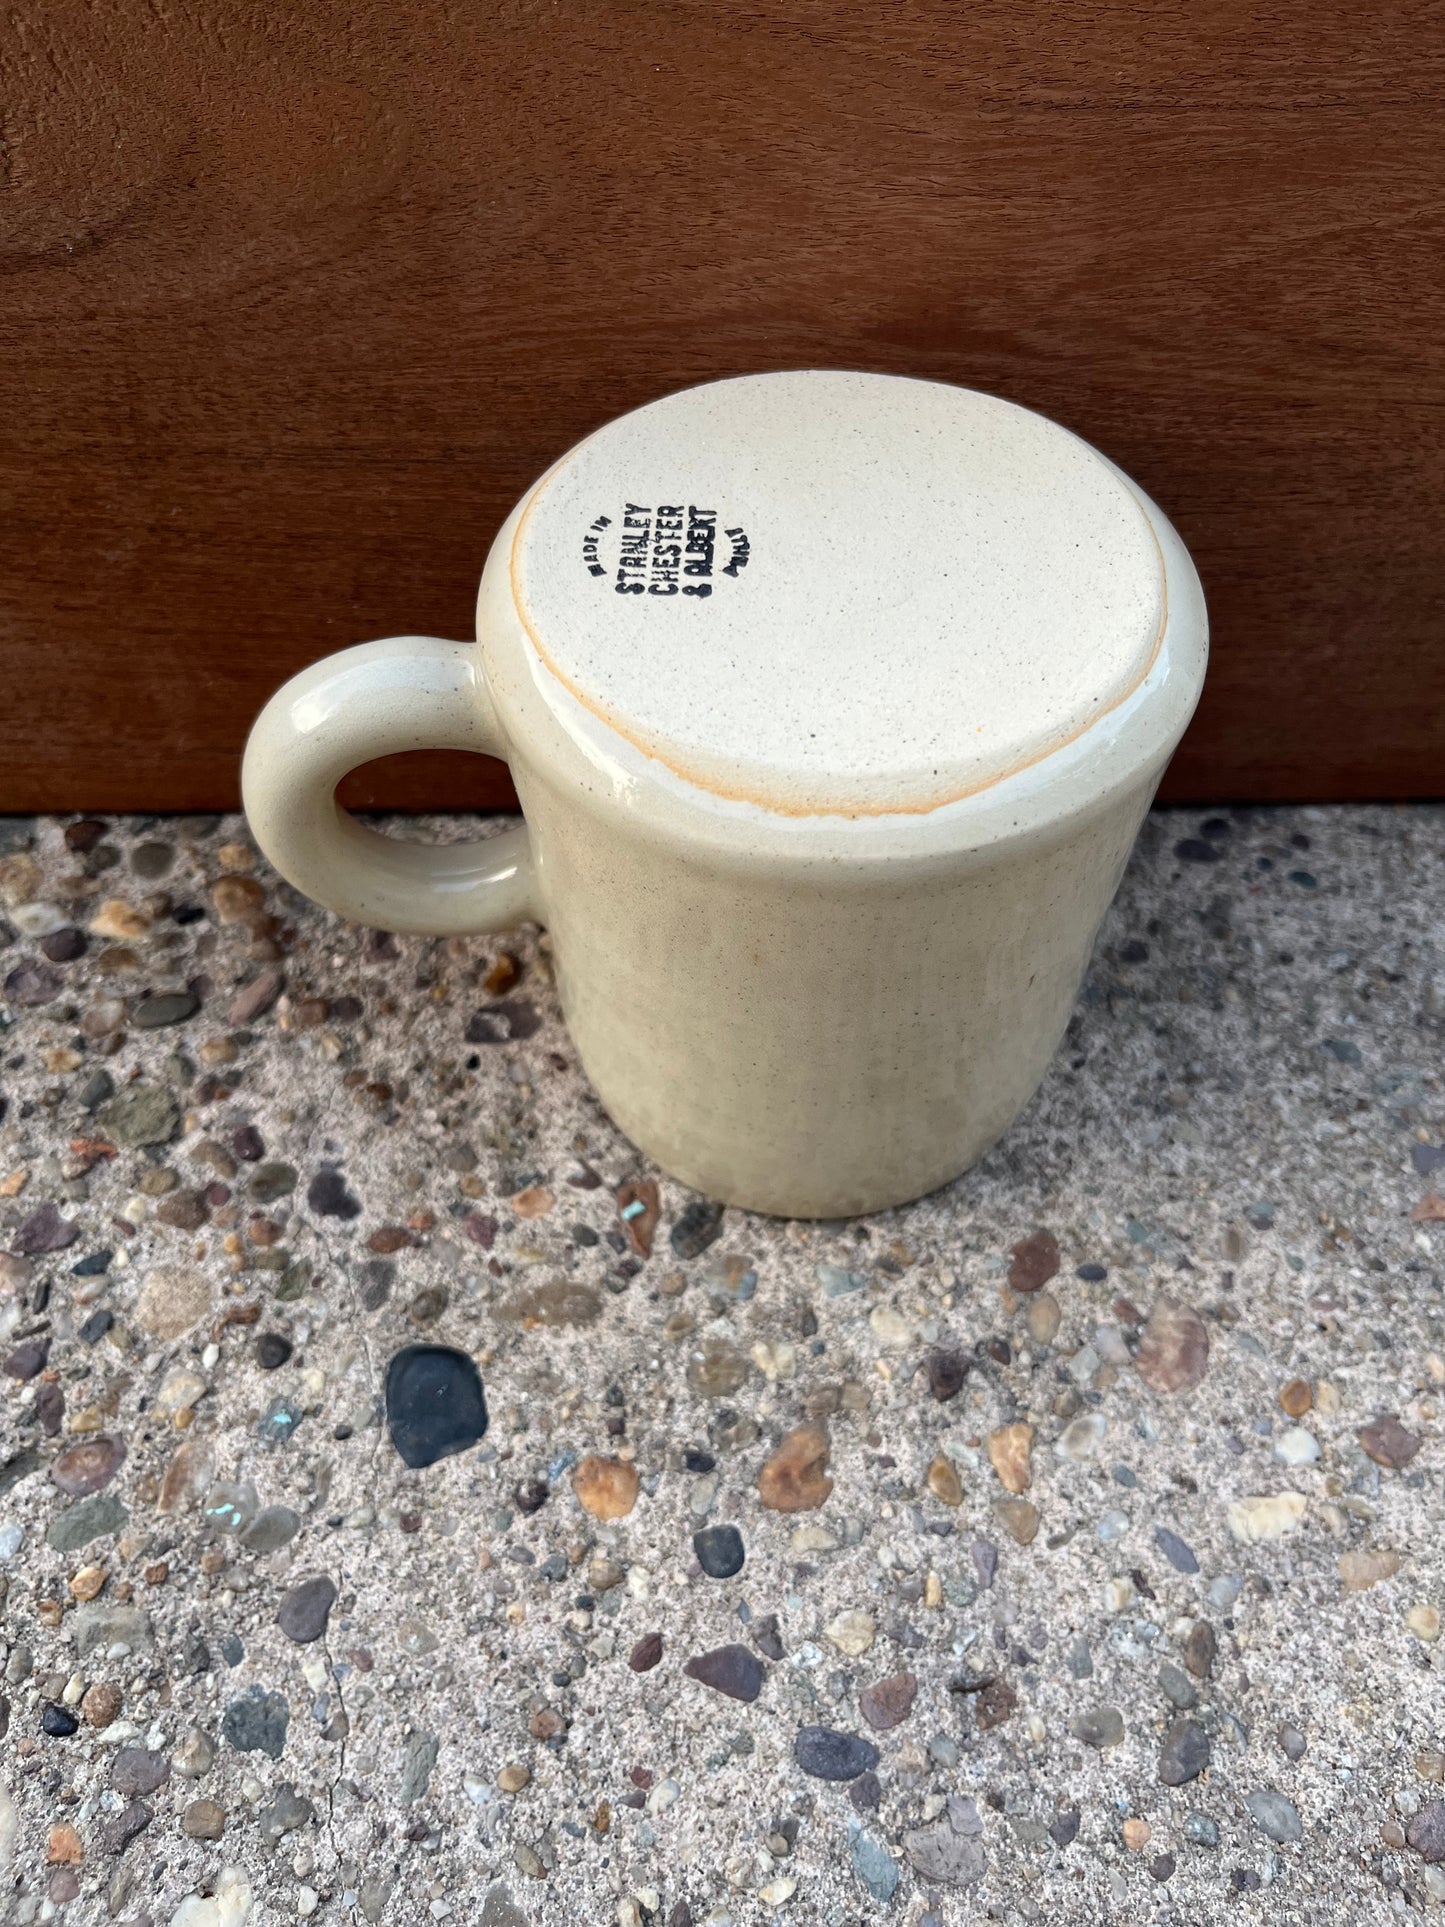 Mid-Century Mug :: Fuck Around and Find Out – Stanley Chester & Albert  Ceramics